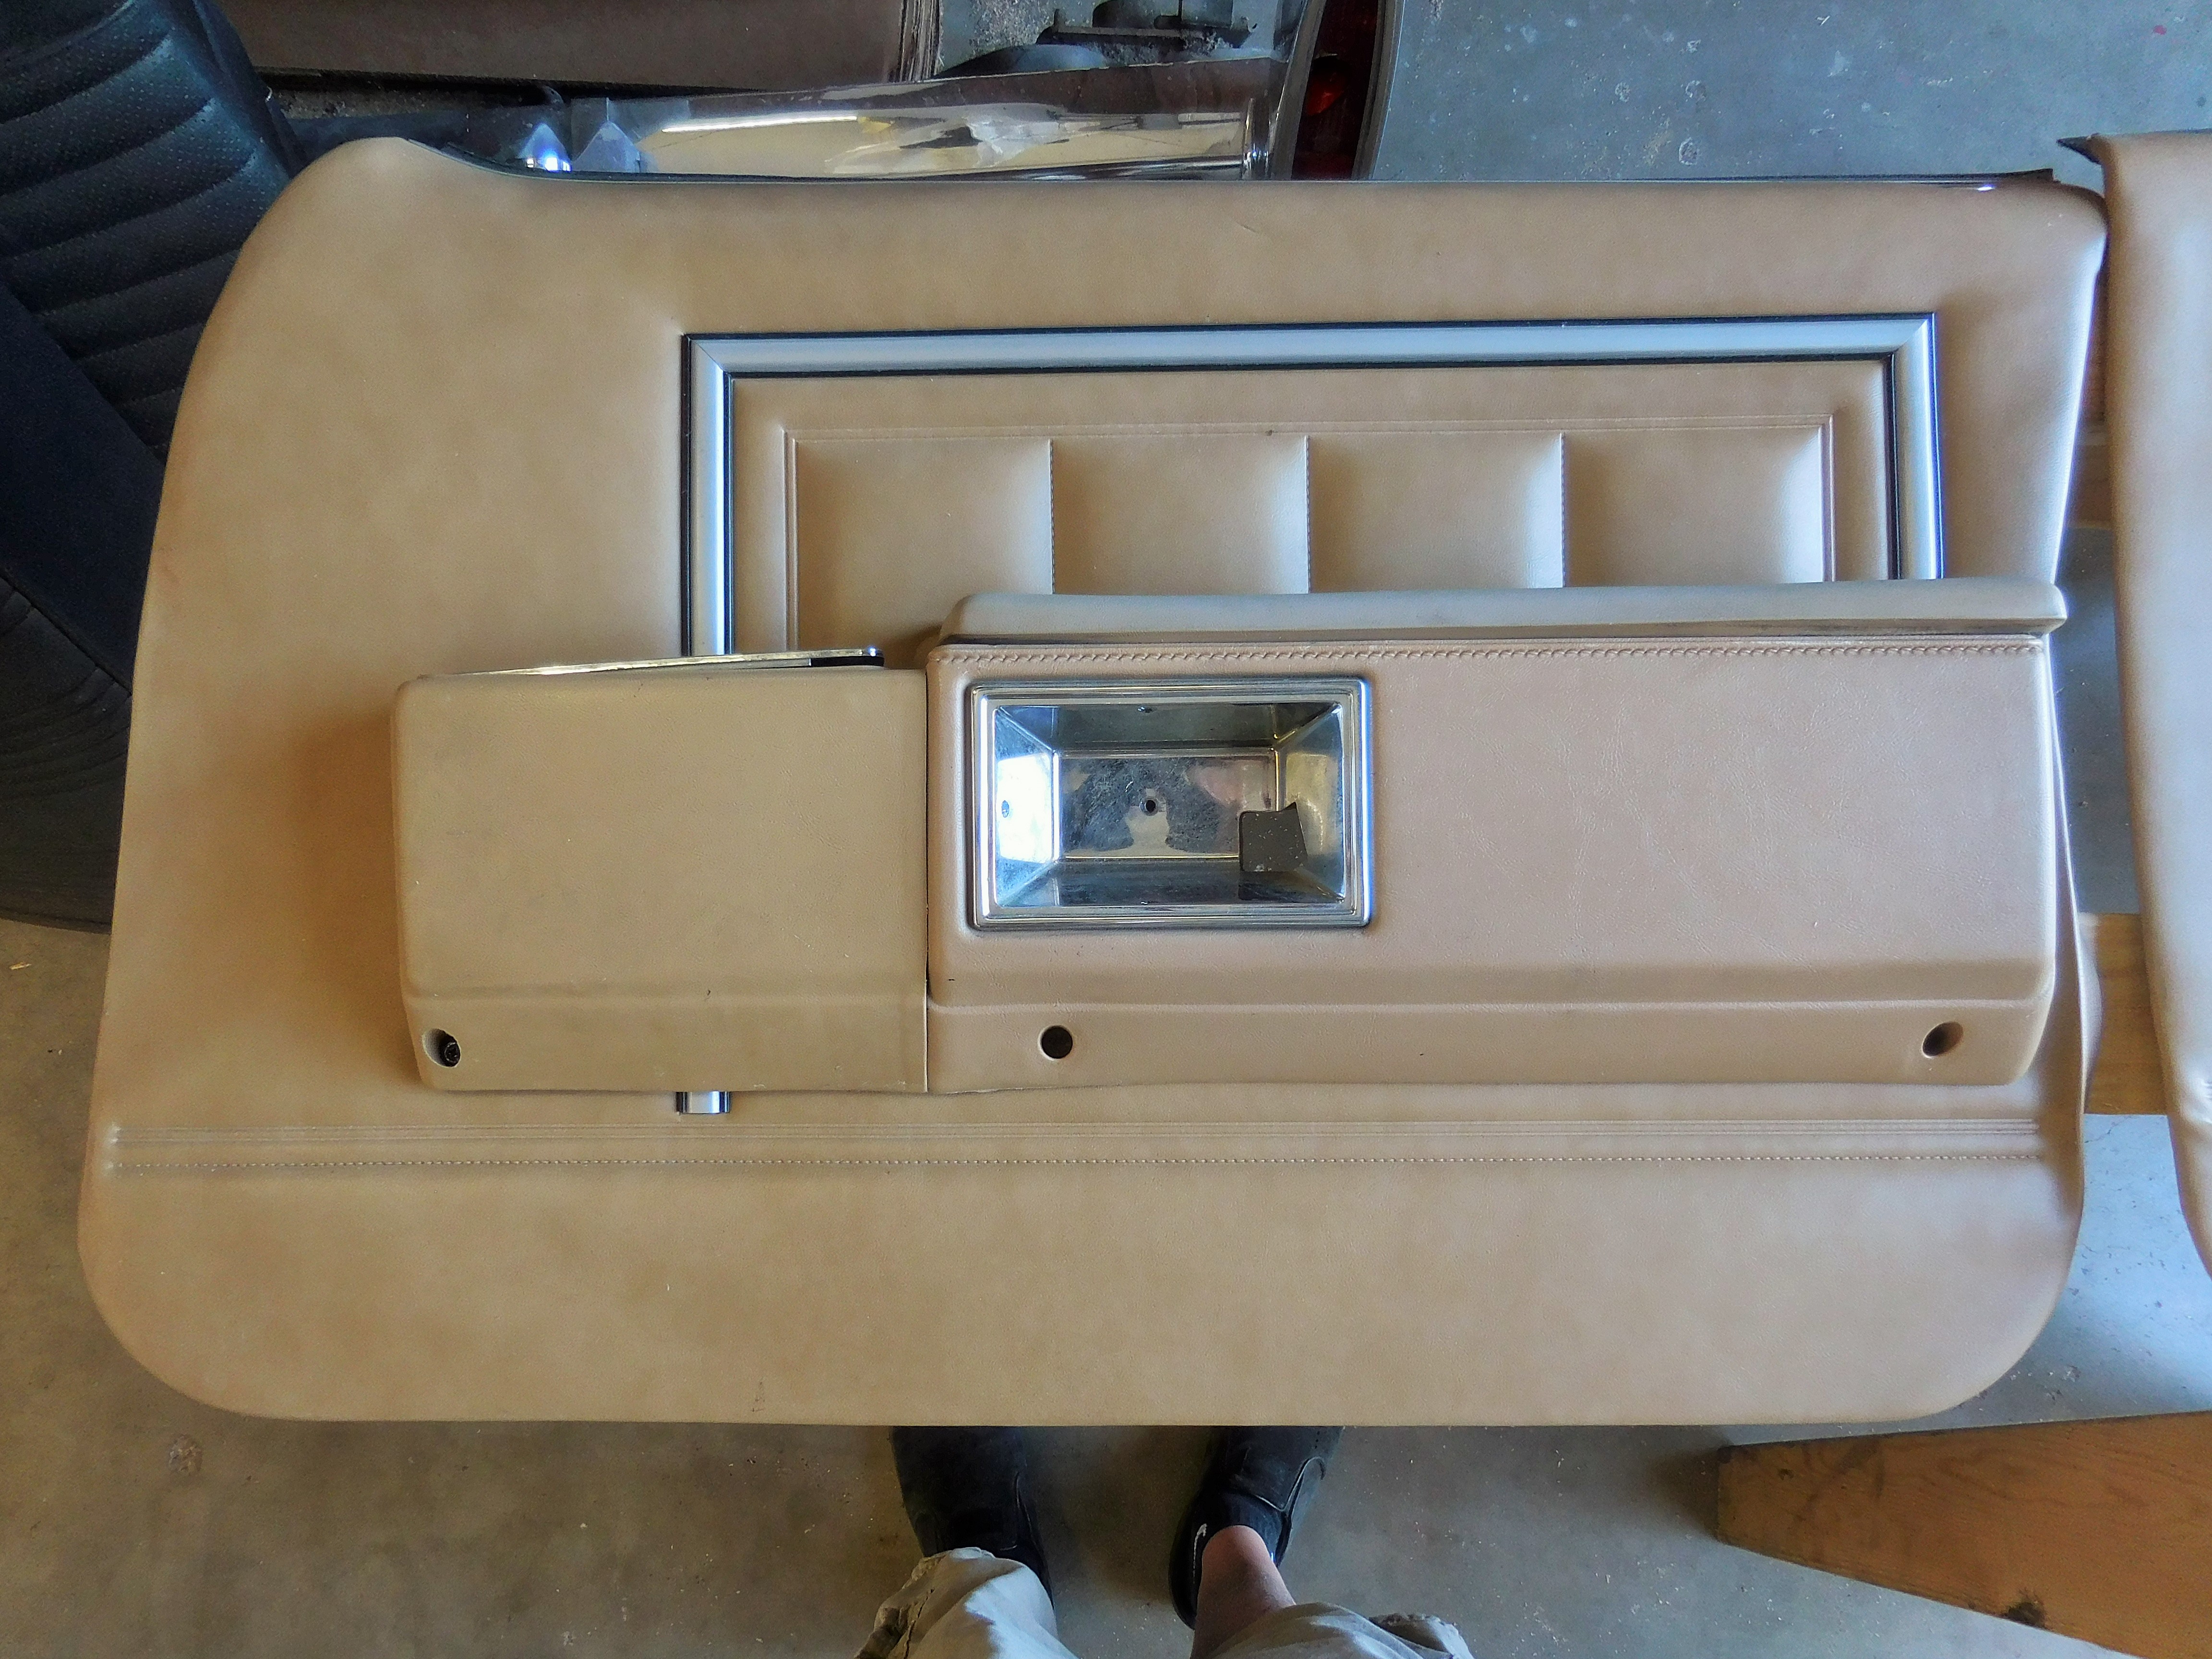 1980,1981,1982,1983,1984,1985,1986,1987,1988,19891986, Chevrolet, Caprice, 4, Door, All, 4, Door, Panels, with, Armrests, and, Switches ,power,switch, armrest,